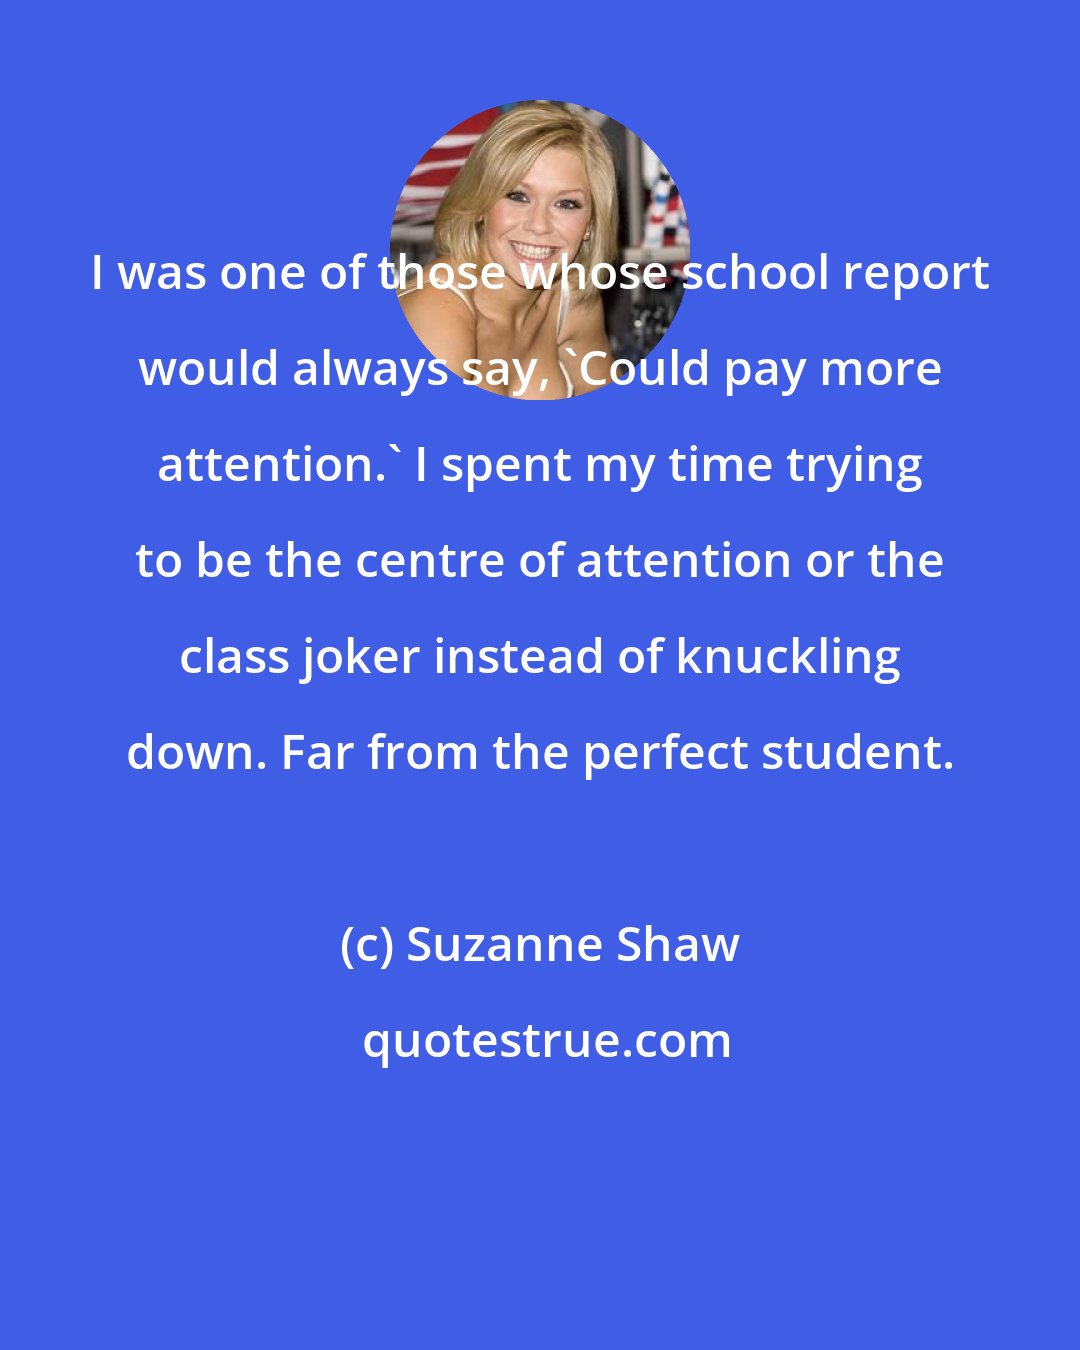 Suzanne Shaw: I was one of those whose school report would always say, 'Could pay more attention.' I spent my time trying to be the centre of attention or the class joker instead of knuckling down. Far from the perfect student.